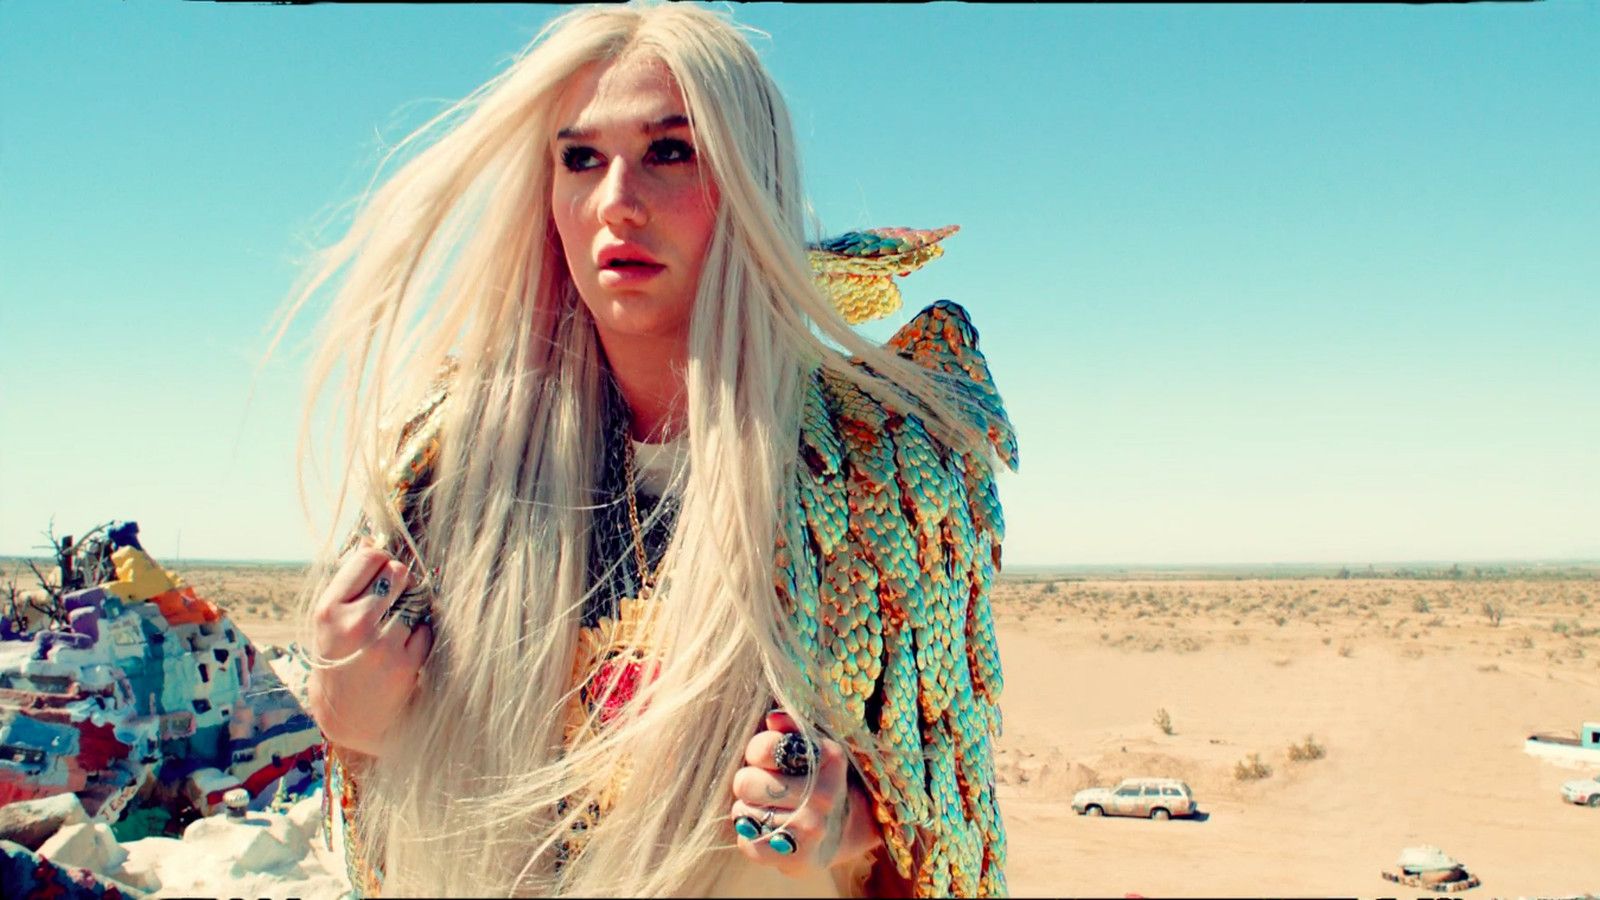 Kesha's New Single “Praying” Is A Scorched Earth Ballad On Betrayal And Hope